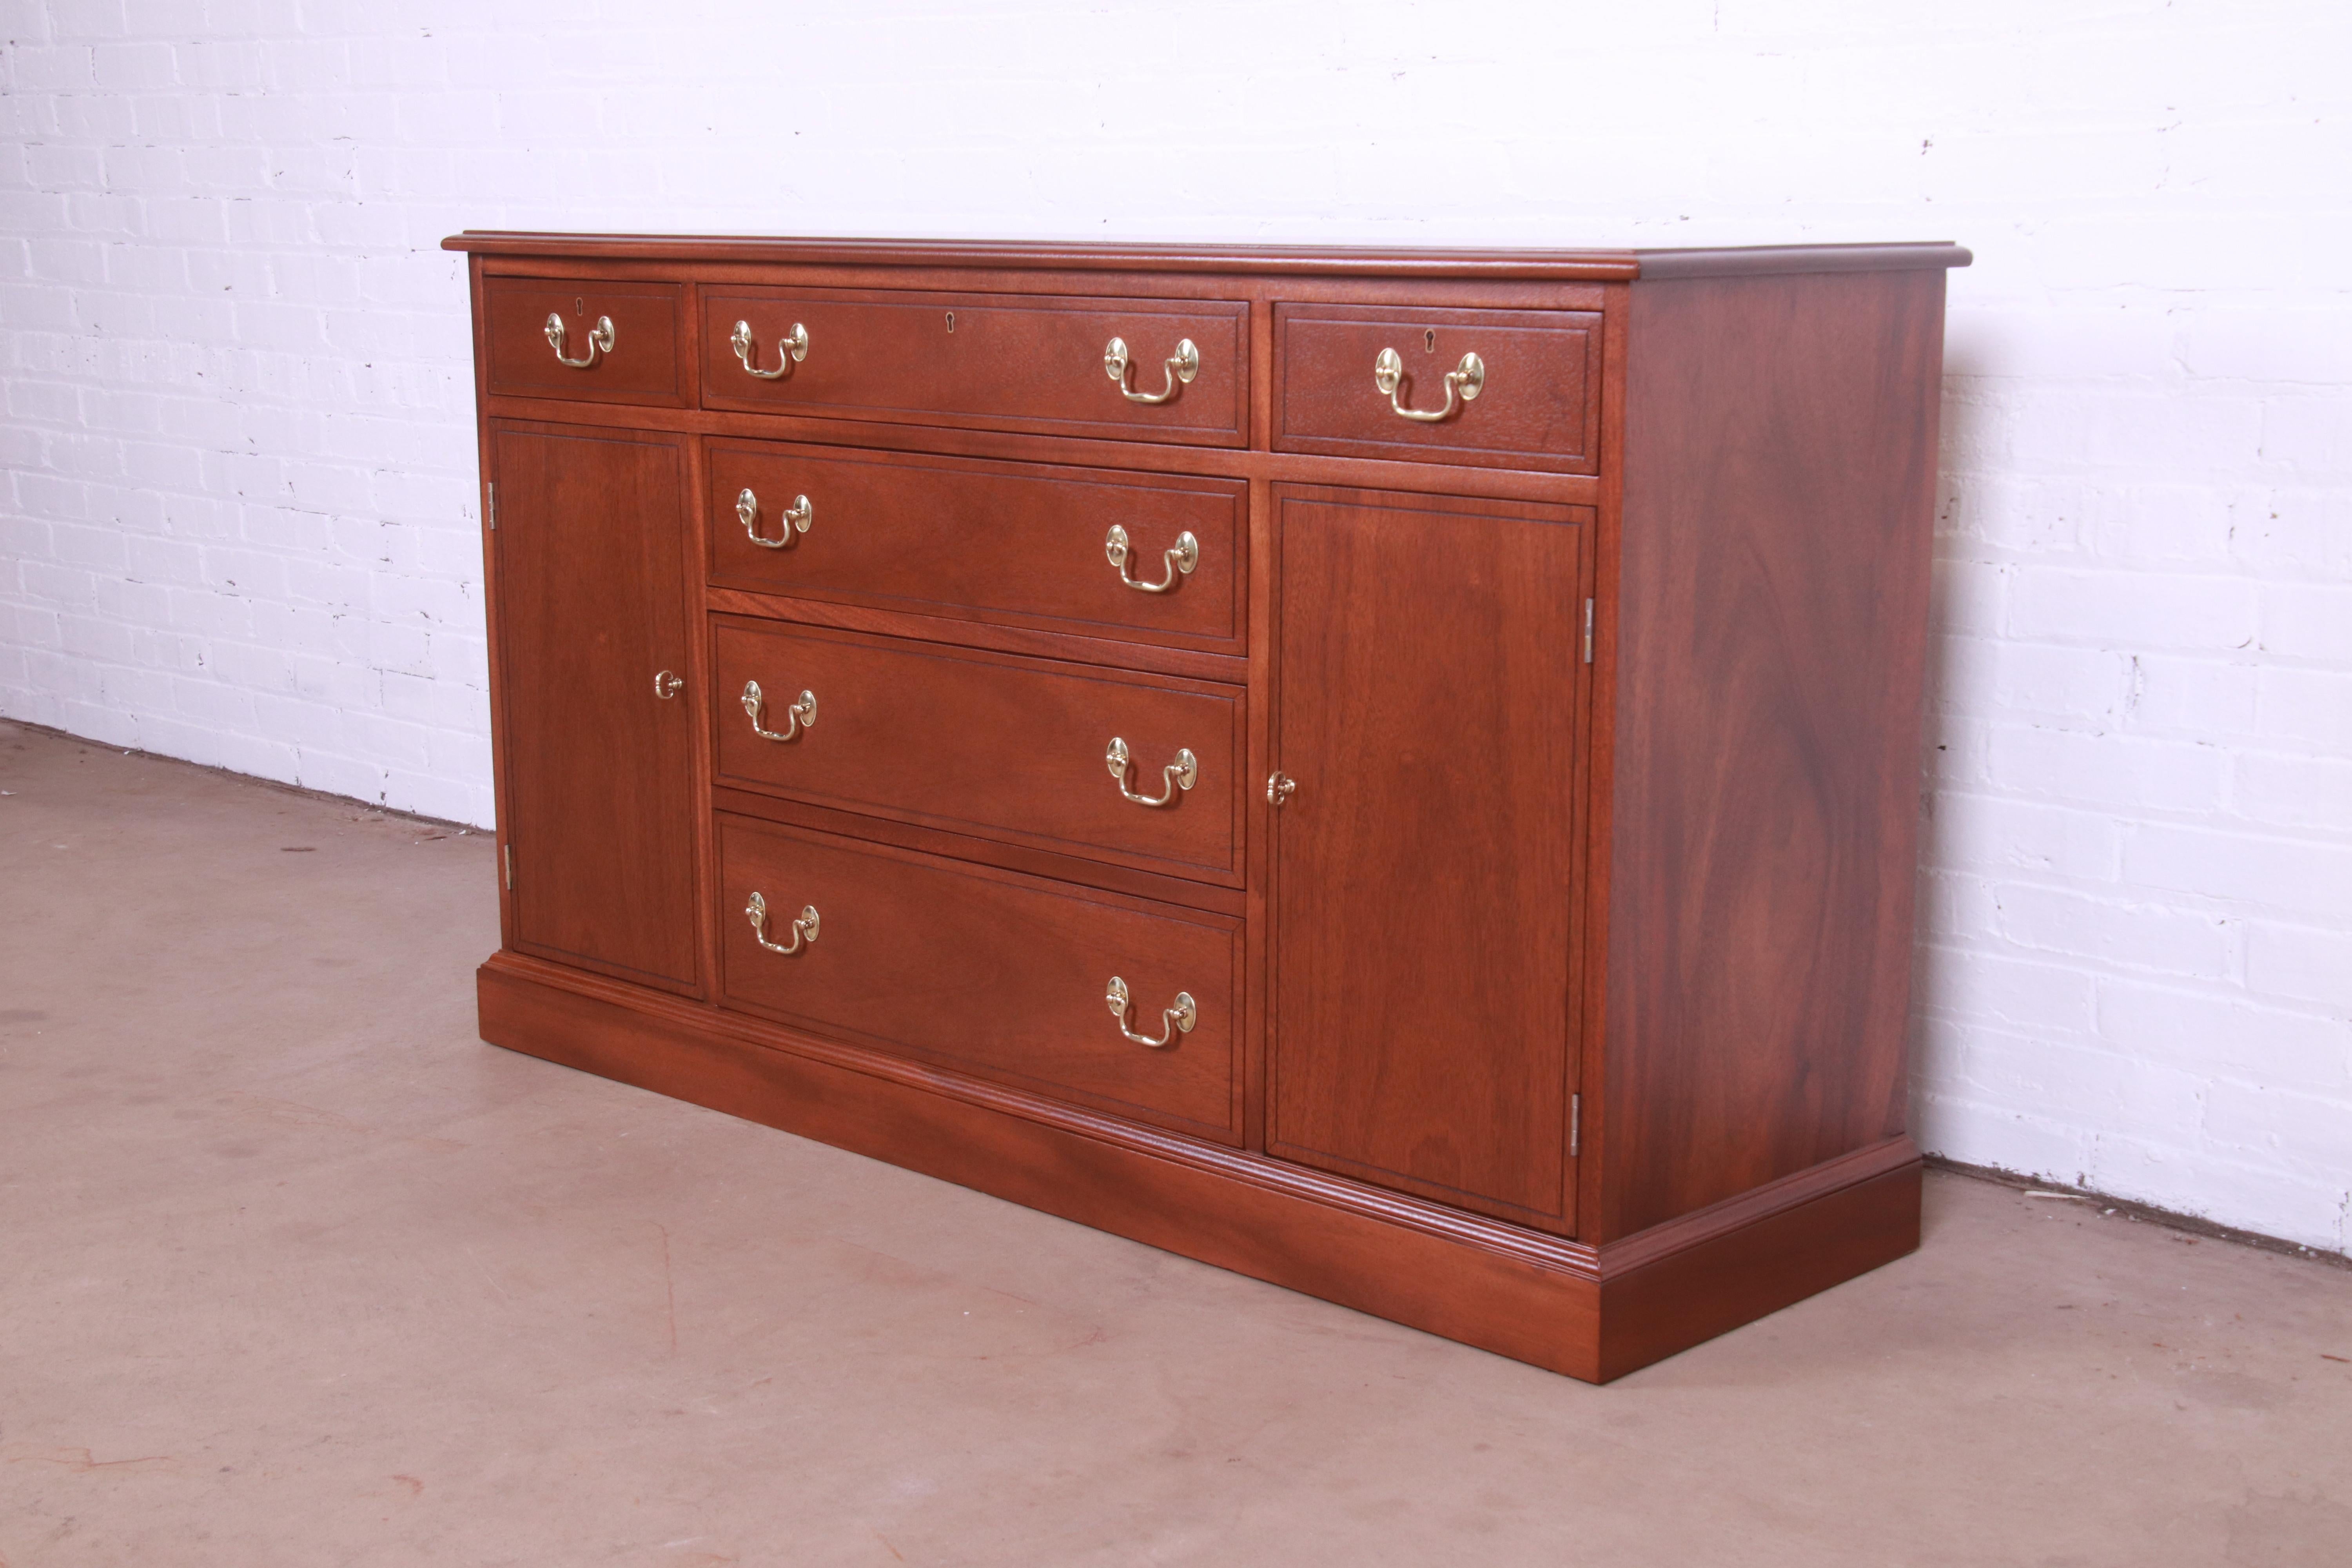 A gorgeous Georgian style sideboard, credenza, or bar cabinet.

By Henkel Harris

USA, 1971

Solid mahogany, with original brass hardware. Top drawers lock, and key is included.

Measures: 54.75